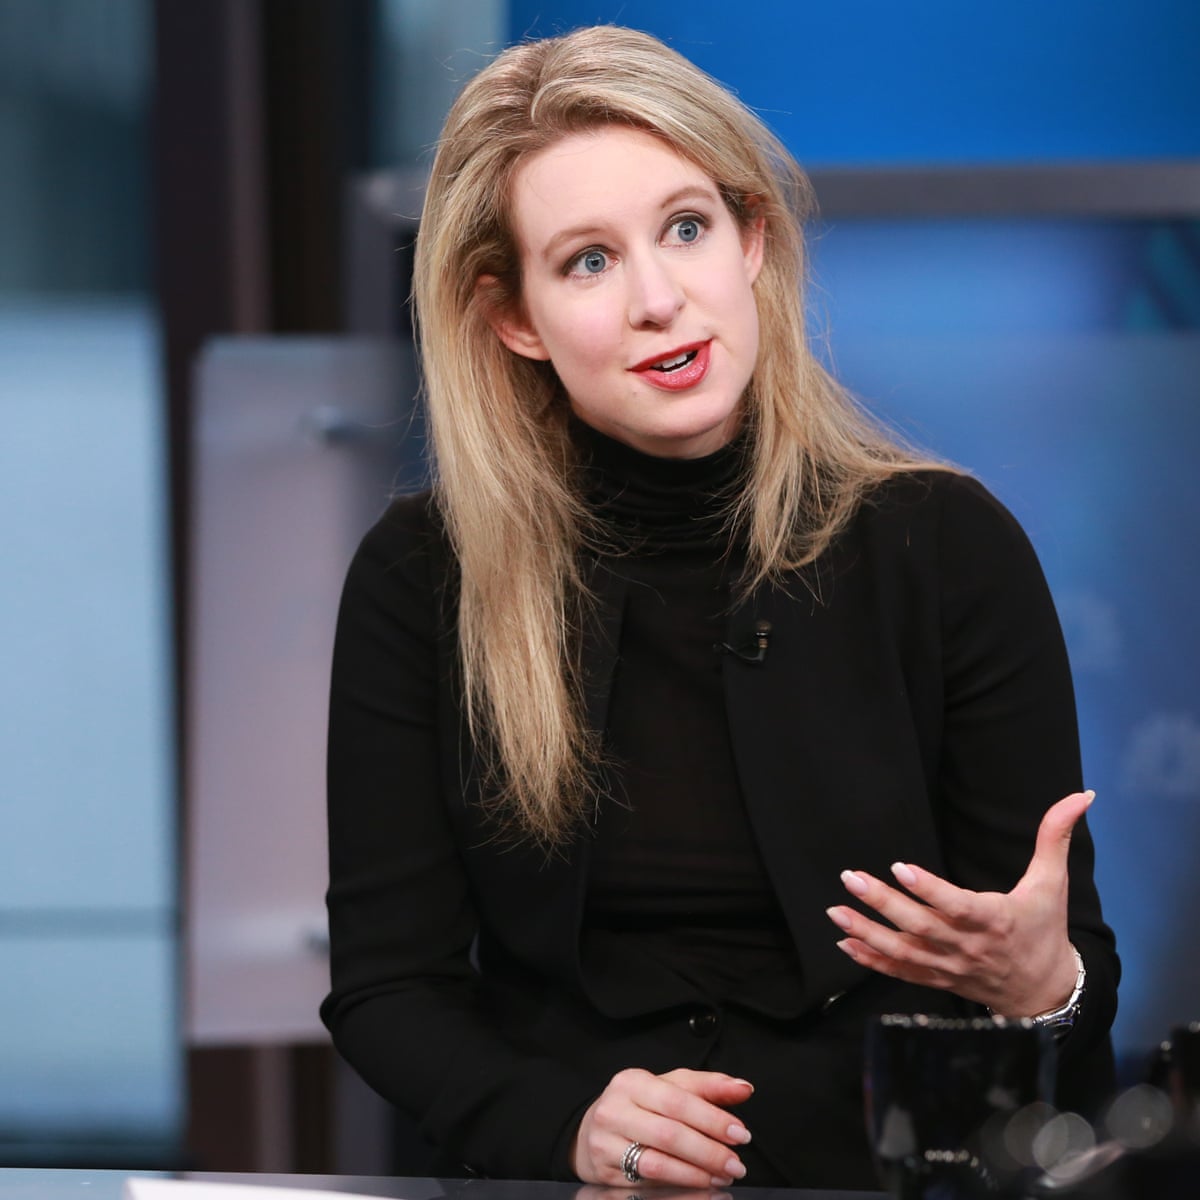 One-time billionaire, Elizabeth Holmes facing 20 years in prison for fraud